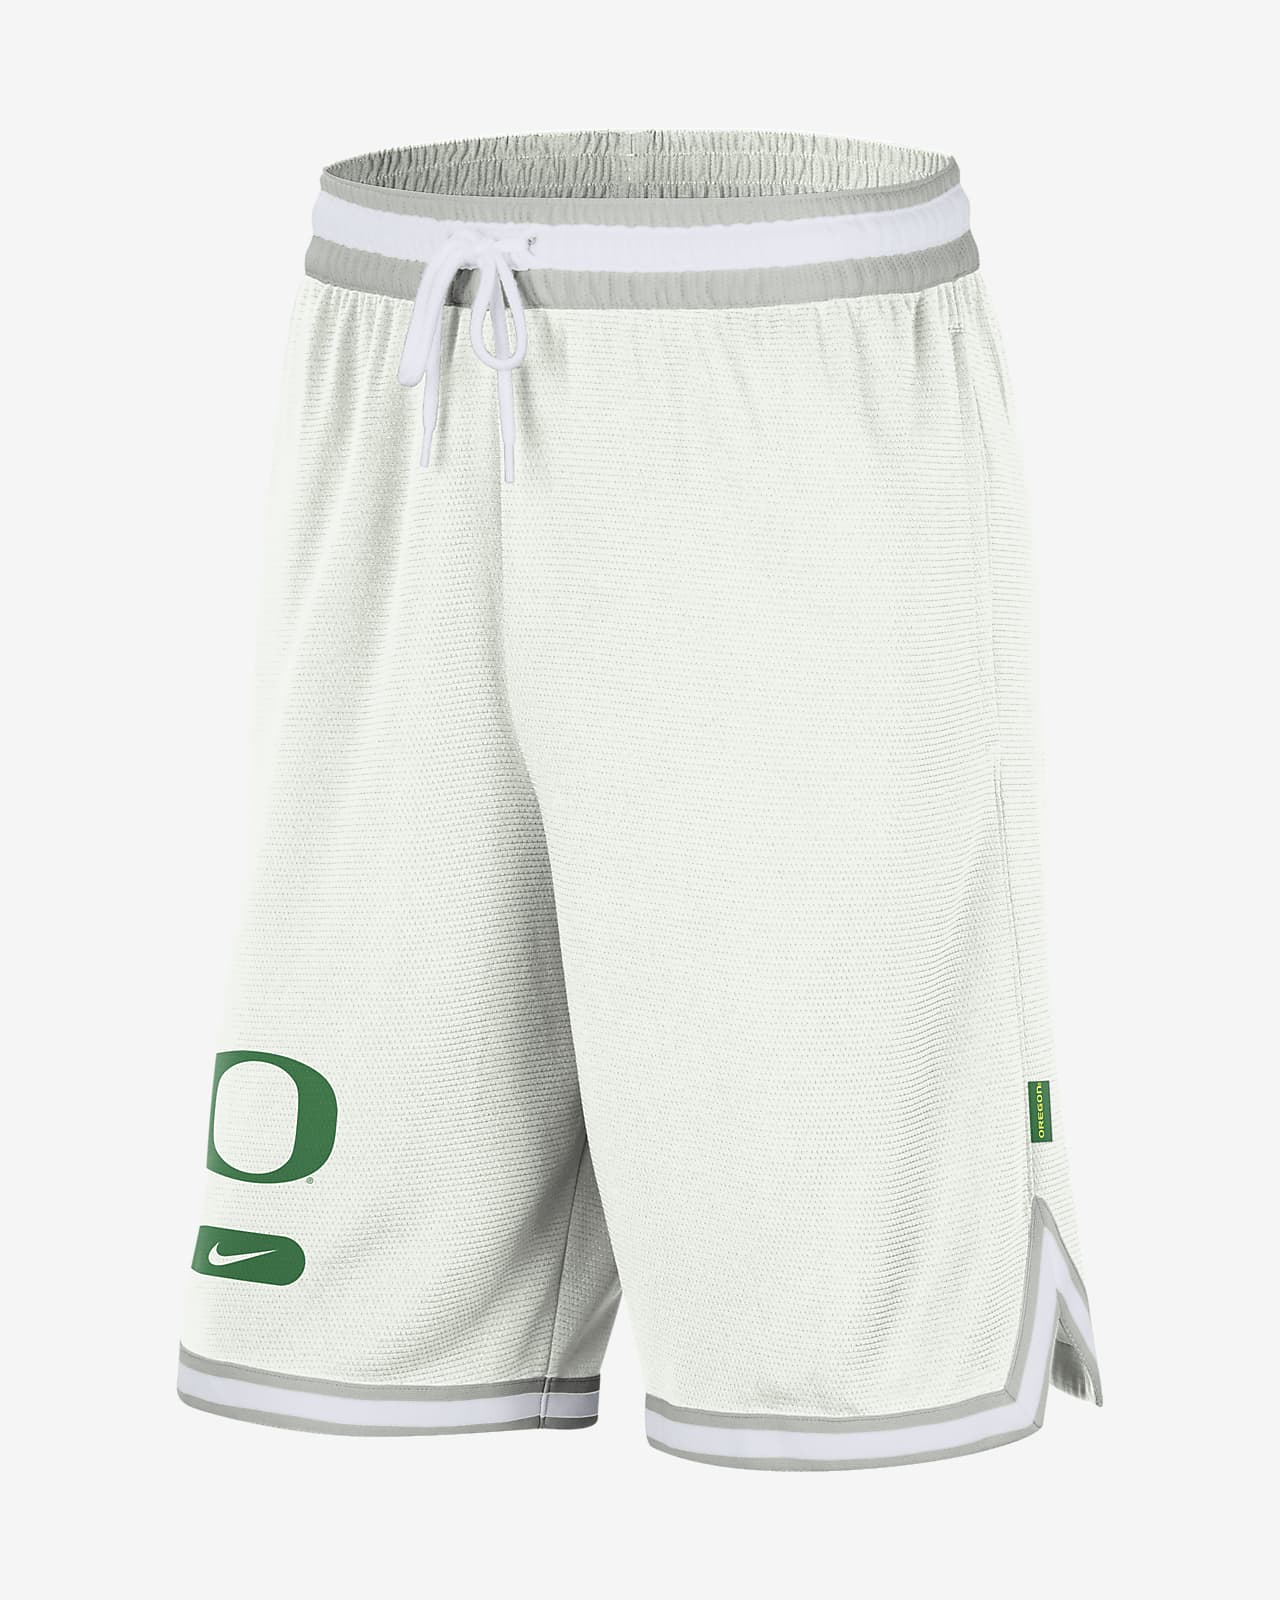 Nike NBA Authentics Dri-Fit Compression Shorts Men's White/Gray New with  Tags 2XLT 450 - Locker Room Direct